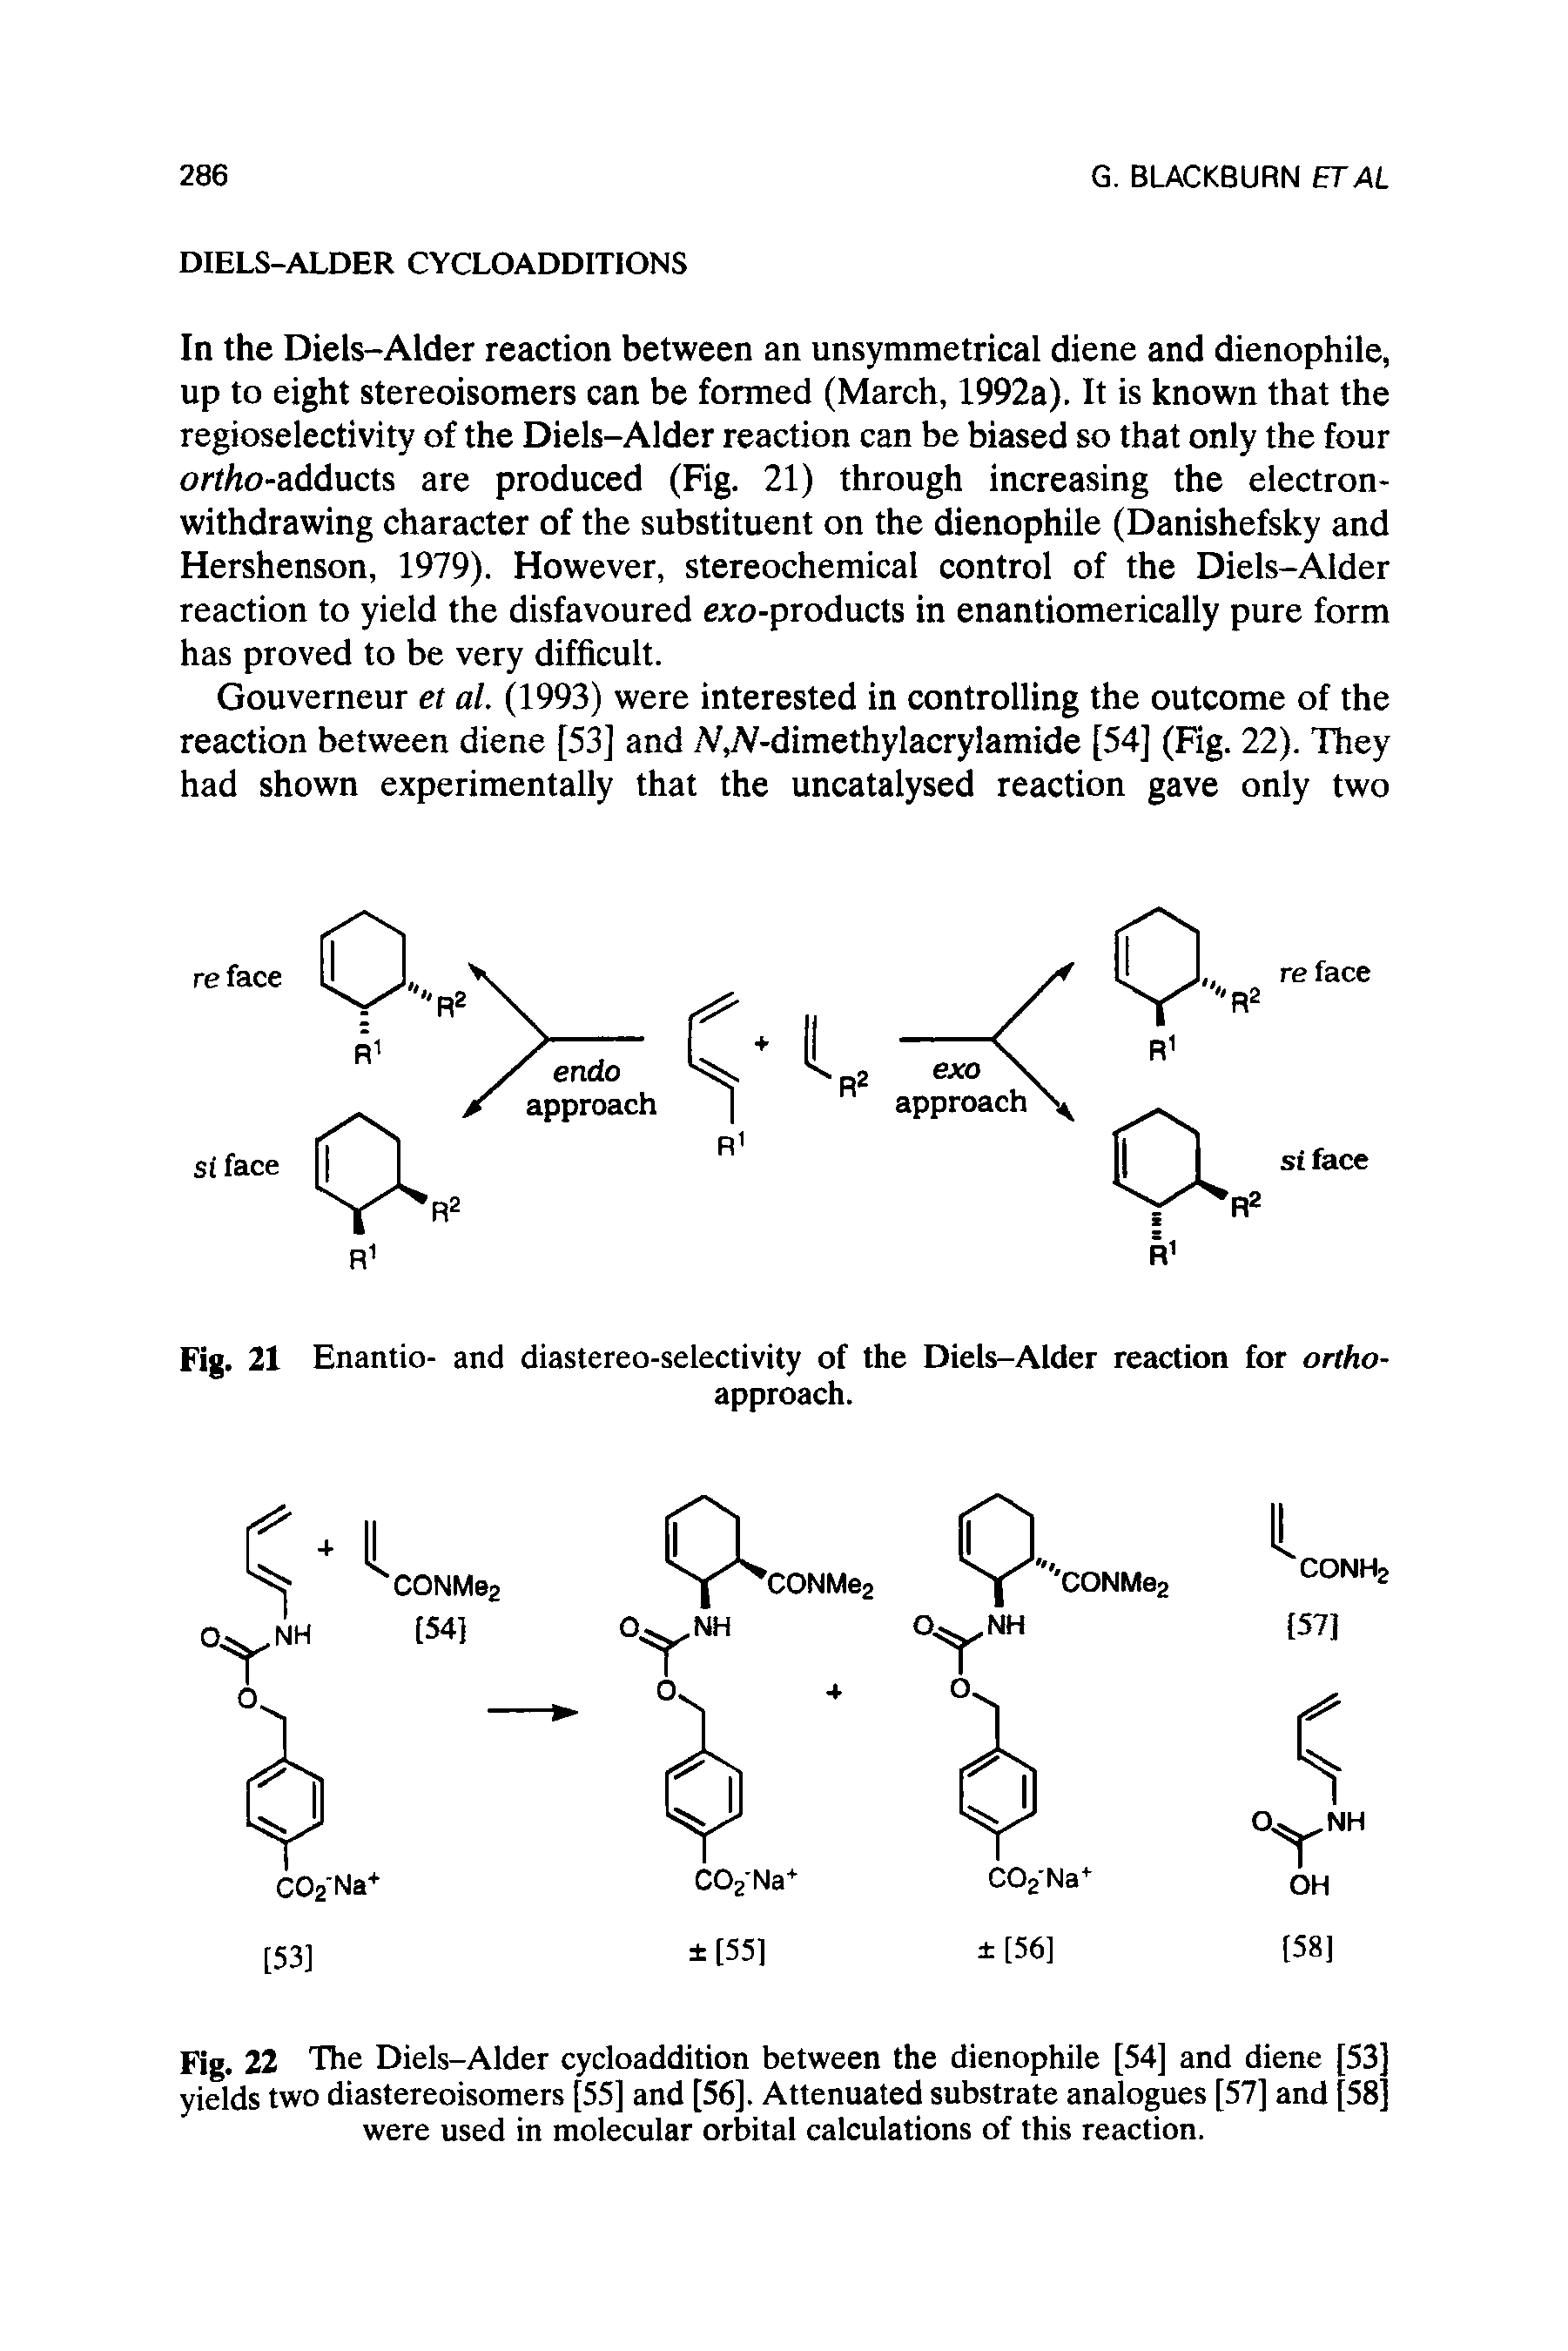 Fig. 22 The Diels-Alder cycloaddition between the dienophile [54] and diene [53 yields two diastereoisomers [55] and [56]. Attenuated substrate analogues [57] and [58 were used in molecular orbital calculations of this reaction.